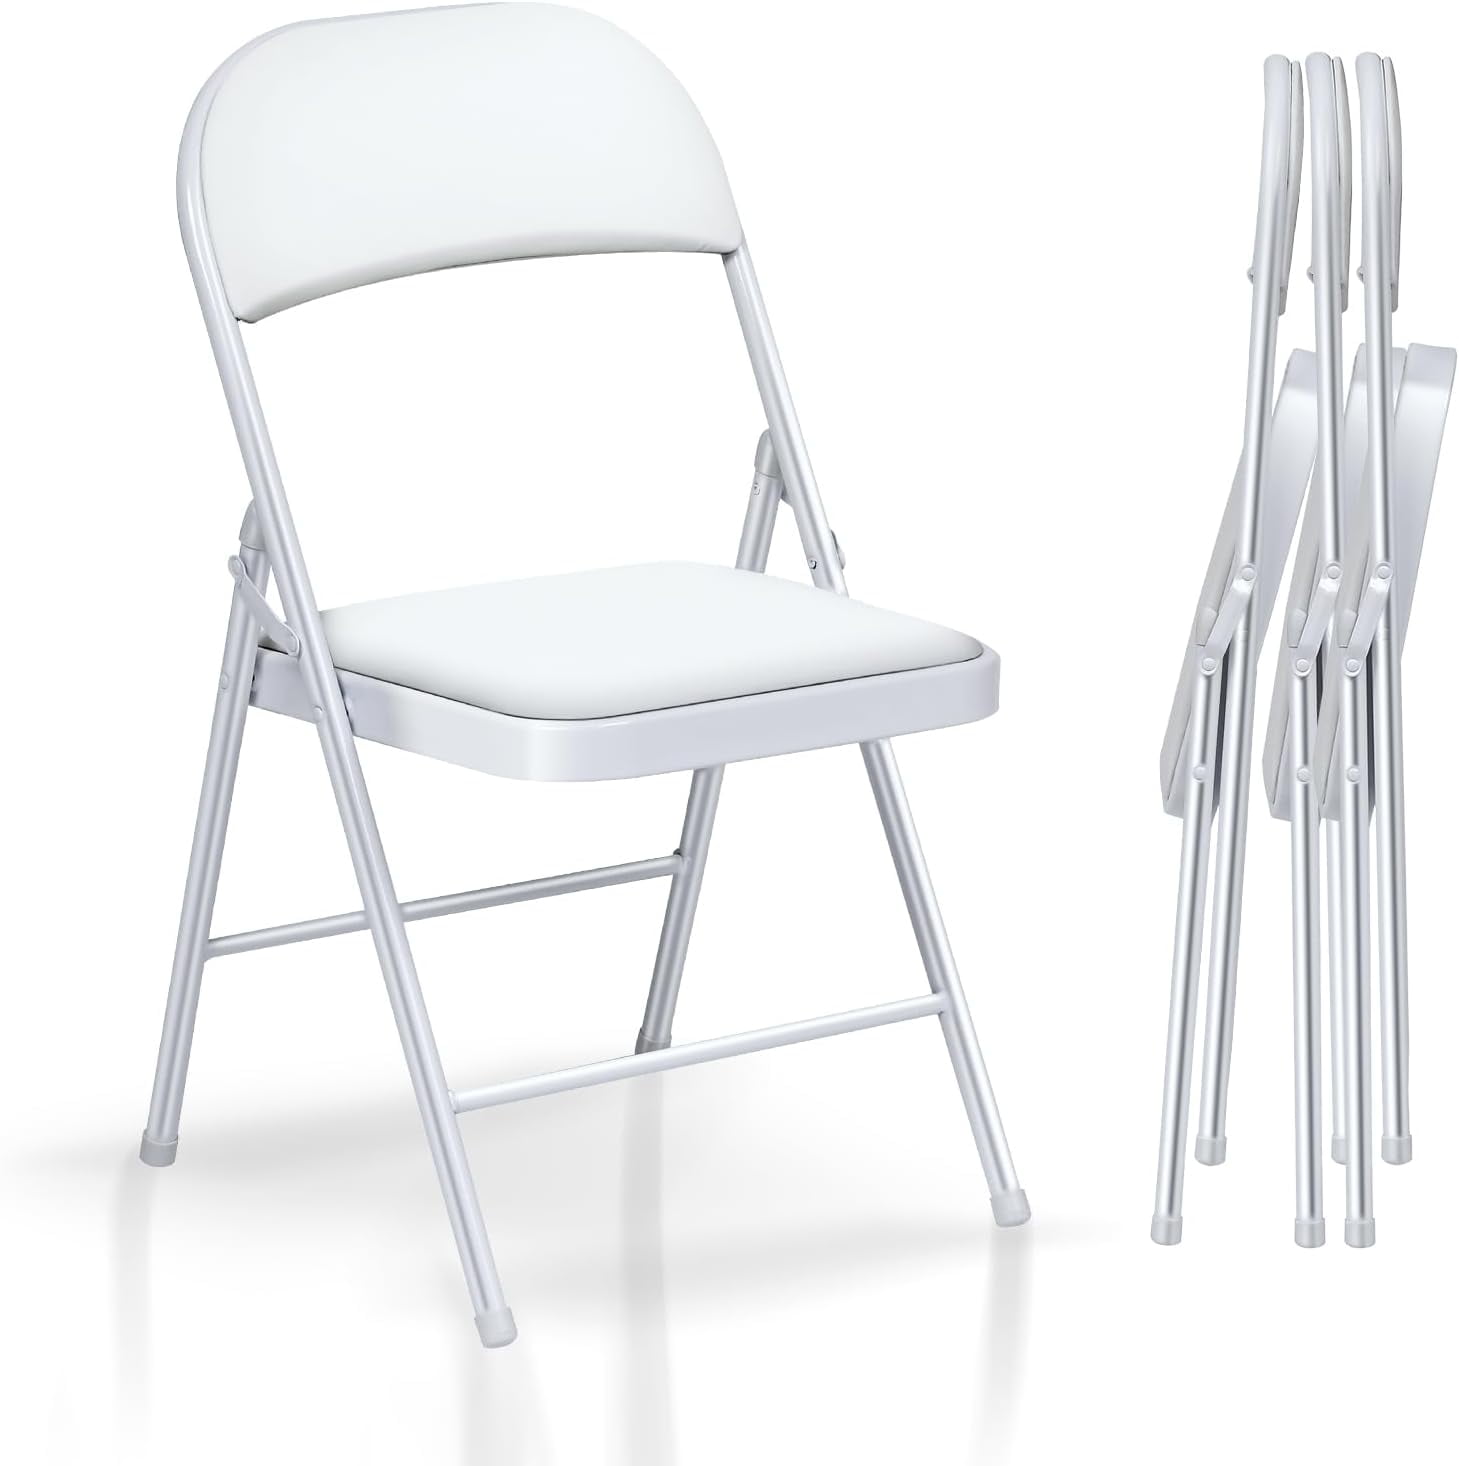 Dropship White/Black Plastic Folding Chair For Wedding Commercial Events  Stackable Folding Chairs With Padded Cushion Seat to Sell Online at a Lower  Price